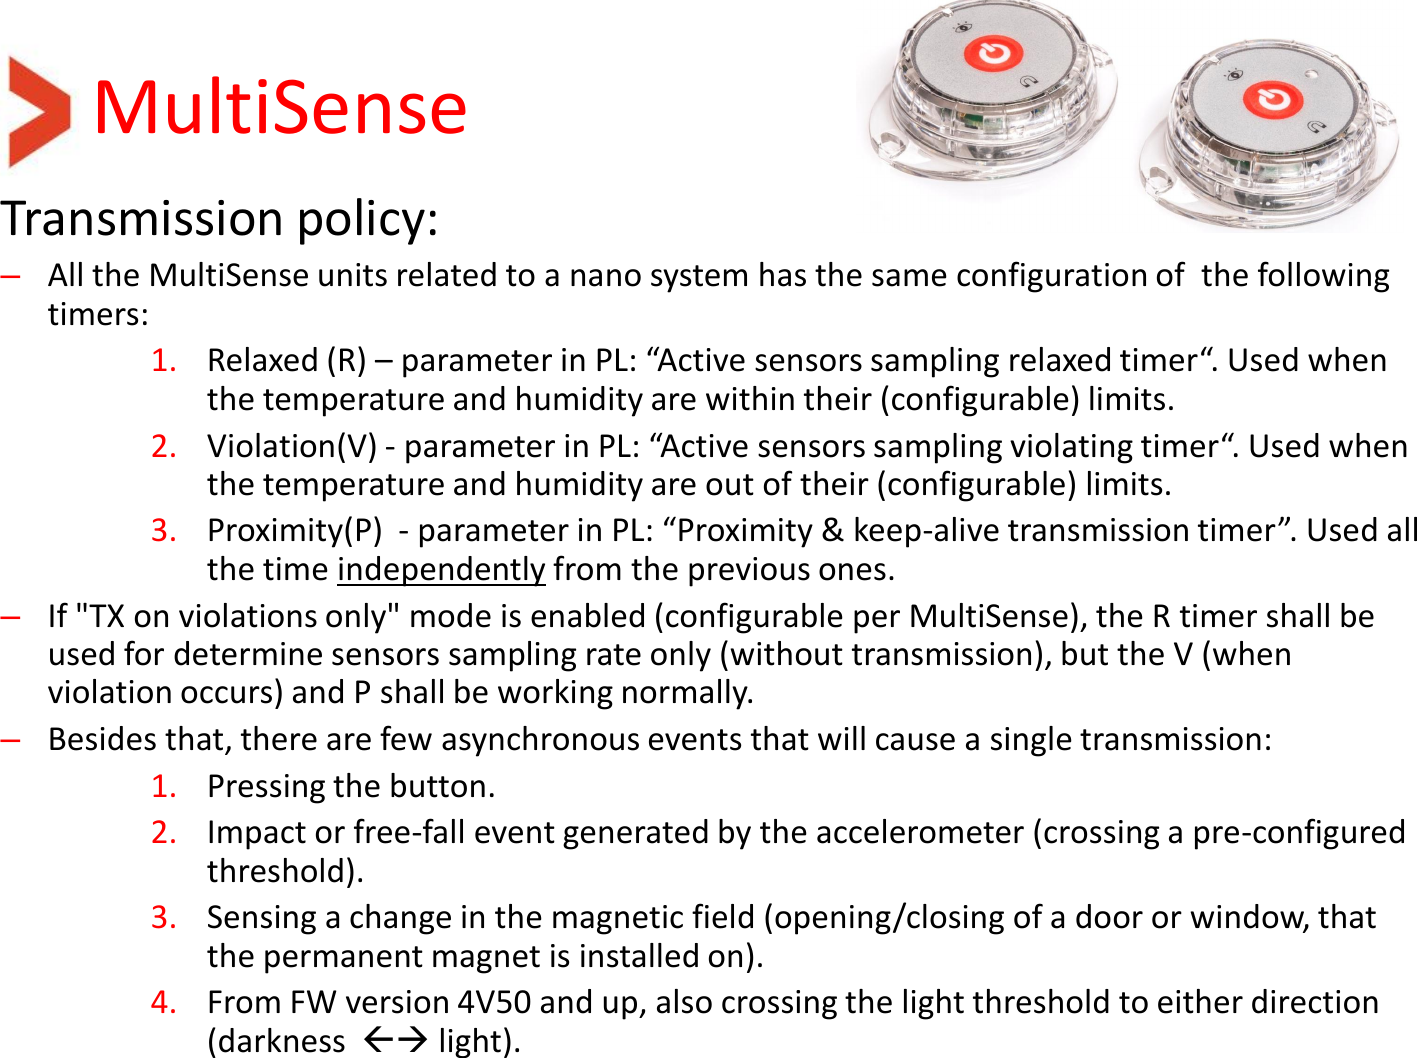 MultiSense Transmission policy: –All the MultiSense units related to a nano system has the same configuration of  the following timers: 1. Relaxed (R) – parameter in PL: “Active sensors sampling relaxed timer“. Used when the temperature and humidity are within their (configurable) limits. 2. Violation(V) - parameter in PL: “Active sensors sampling violating timer“. Used when the temperature and humidity are out of their (configurable) limits. 3. Proximity(P)  - parameter in PL: “Proximity &amp; keep-alive transmission timer”. Used all the time independently from the previous ones. –If &quot;TX on violations only&quot; mode is enabled (configurable per MultiSense), the R timer shall be used for determine sensors sampling rate only (without transmission), but the V (when violation occurs) and P shall be working normally.  –Besides that, there are few asynchronous events that will cause a single transmission: 1. Pressing the button. 2. Impact or free-fall event generated by the accelerometer (crossing a pre-configured threshold). 3. Sensing a change in the magnetic field (opening/closing of a door or window, that the permanent magnet is installed on). 4. From FW version 4V50 and up, also crossing the light threshold to either direction (darkness   light).  